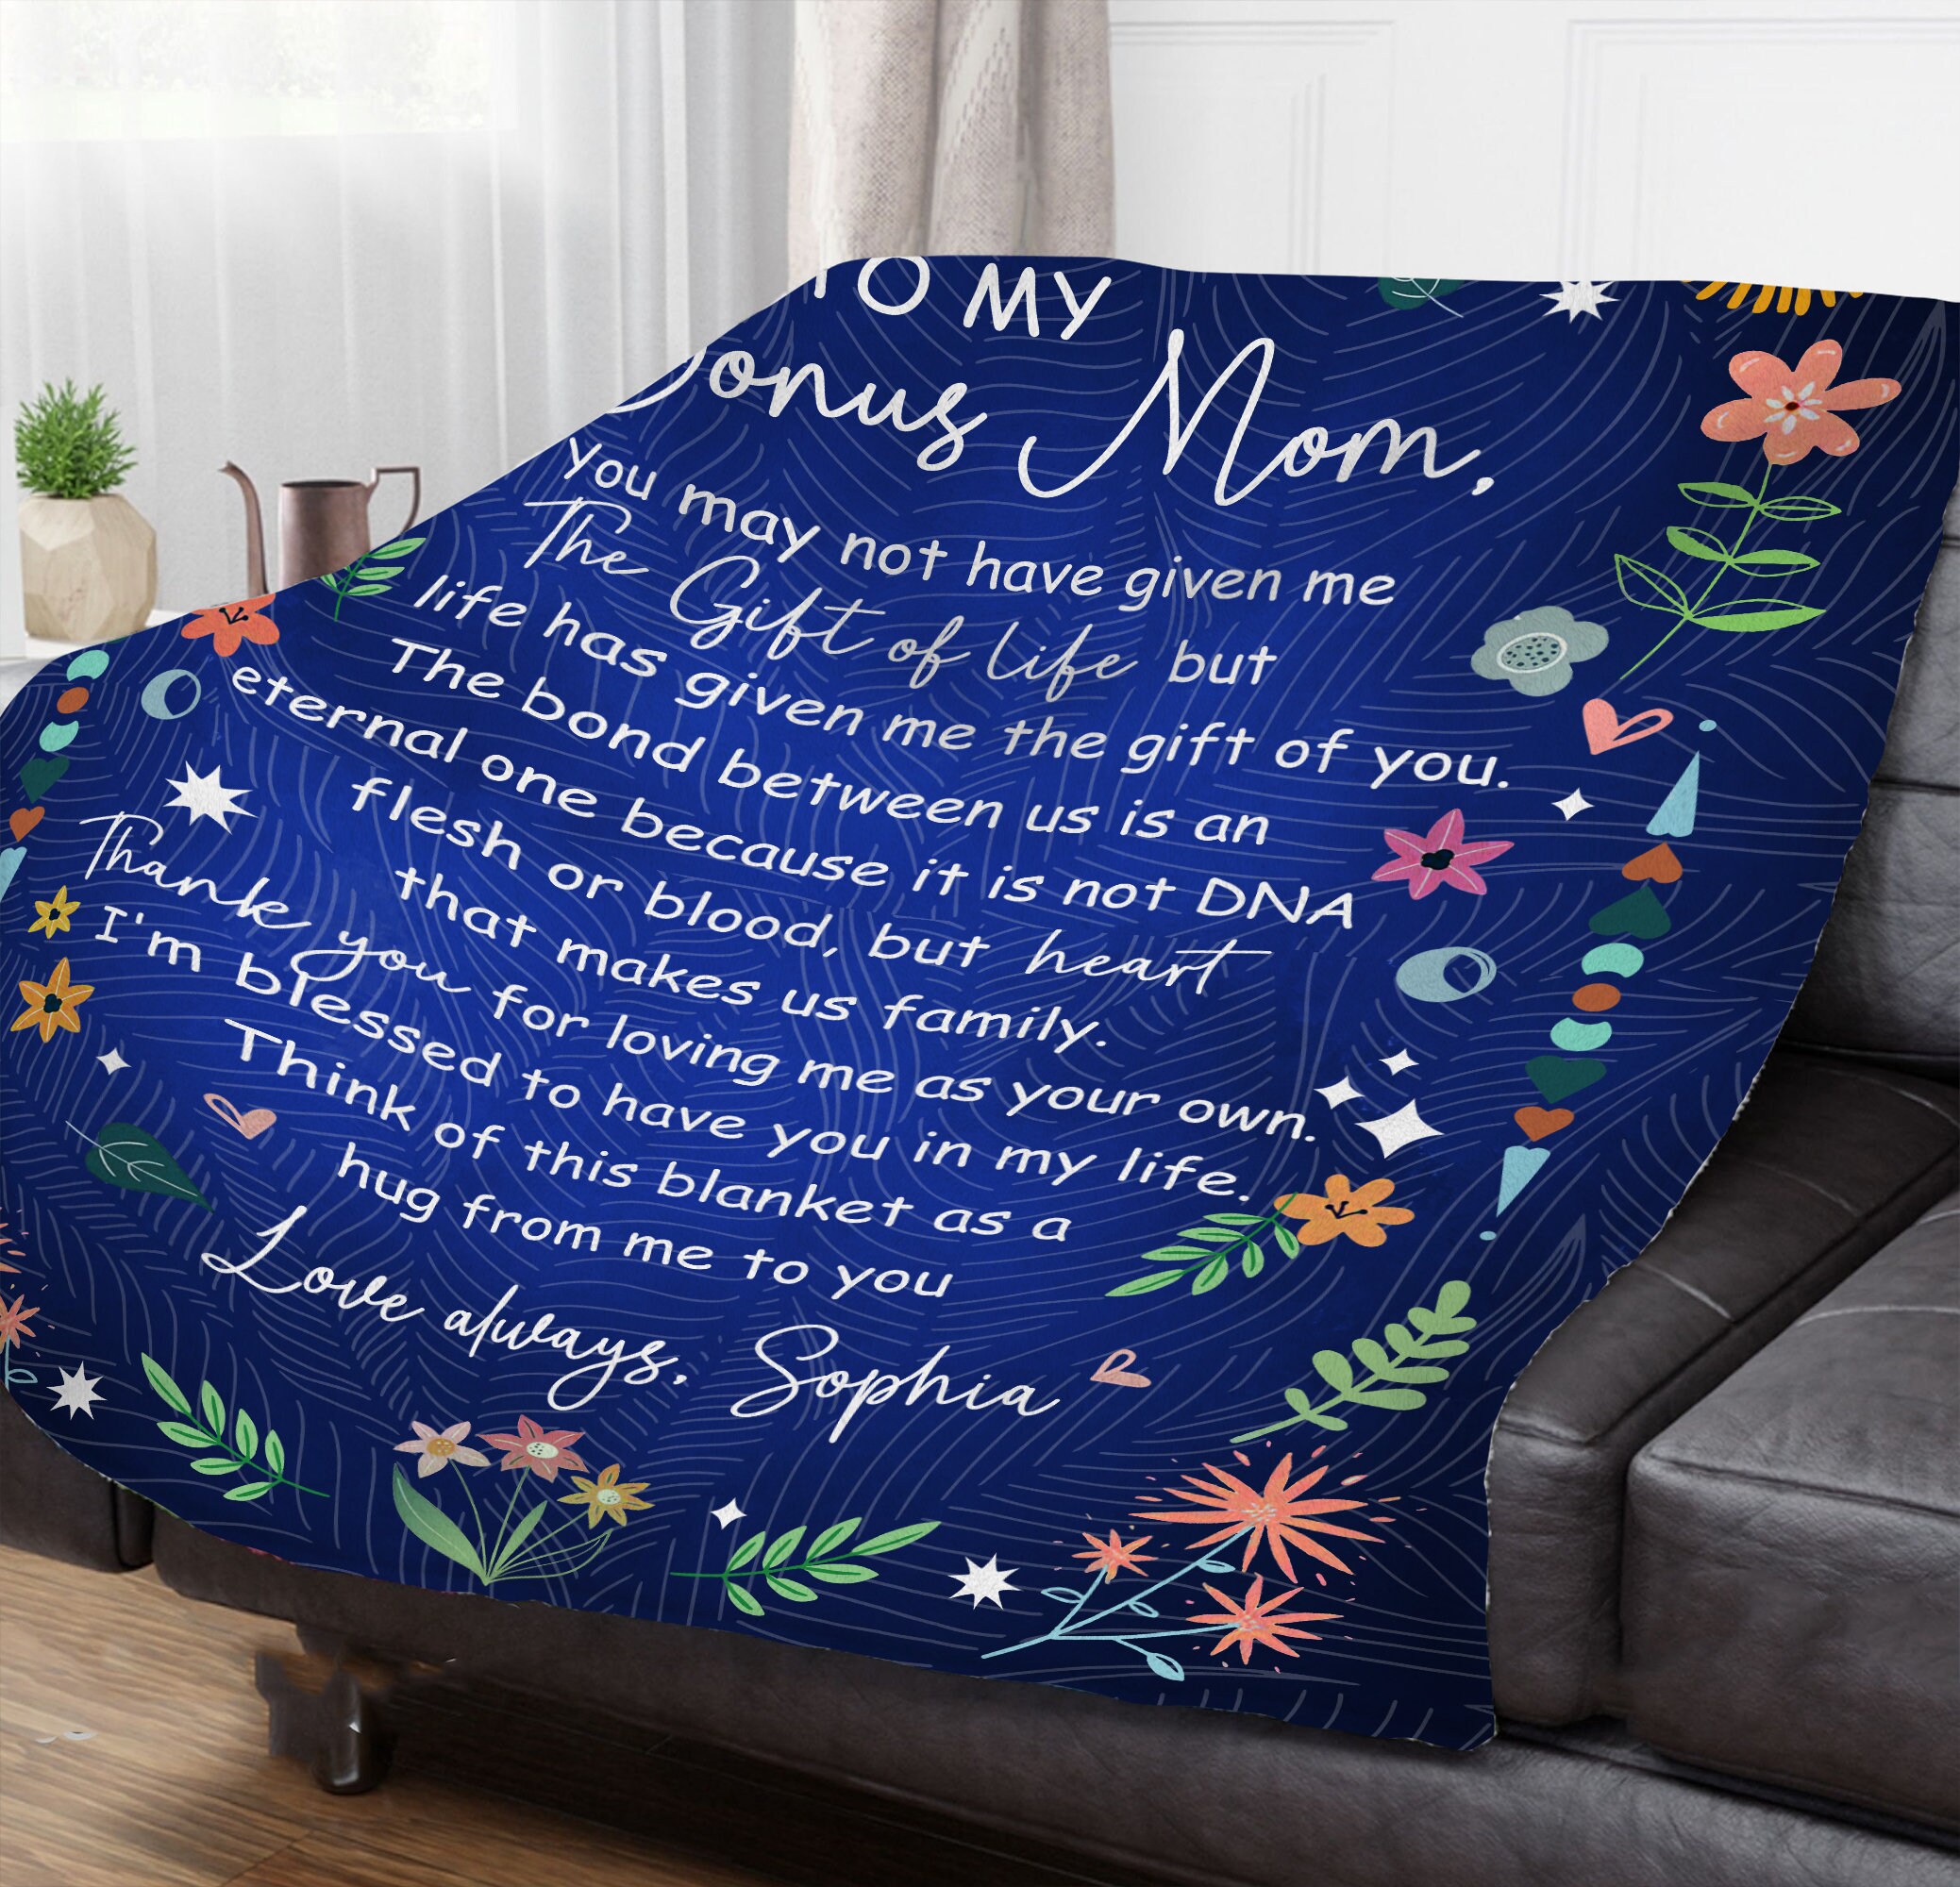 Discover Personalized Fleece Blanket For Bonus Mom, Christmas Gifts For Stepmother, Stepmom Gifts, Custom Step Mom Blanket, To My Bonus Mom Blanket